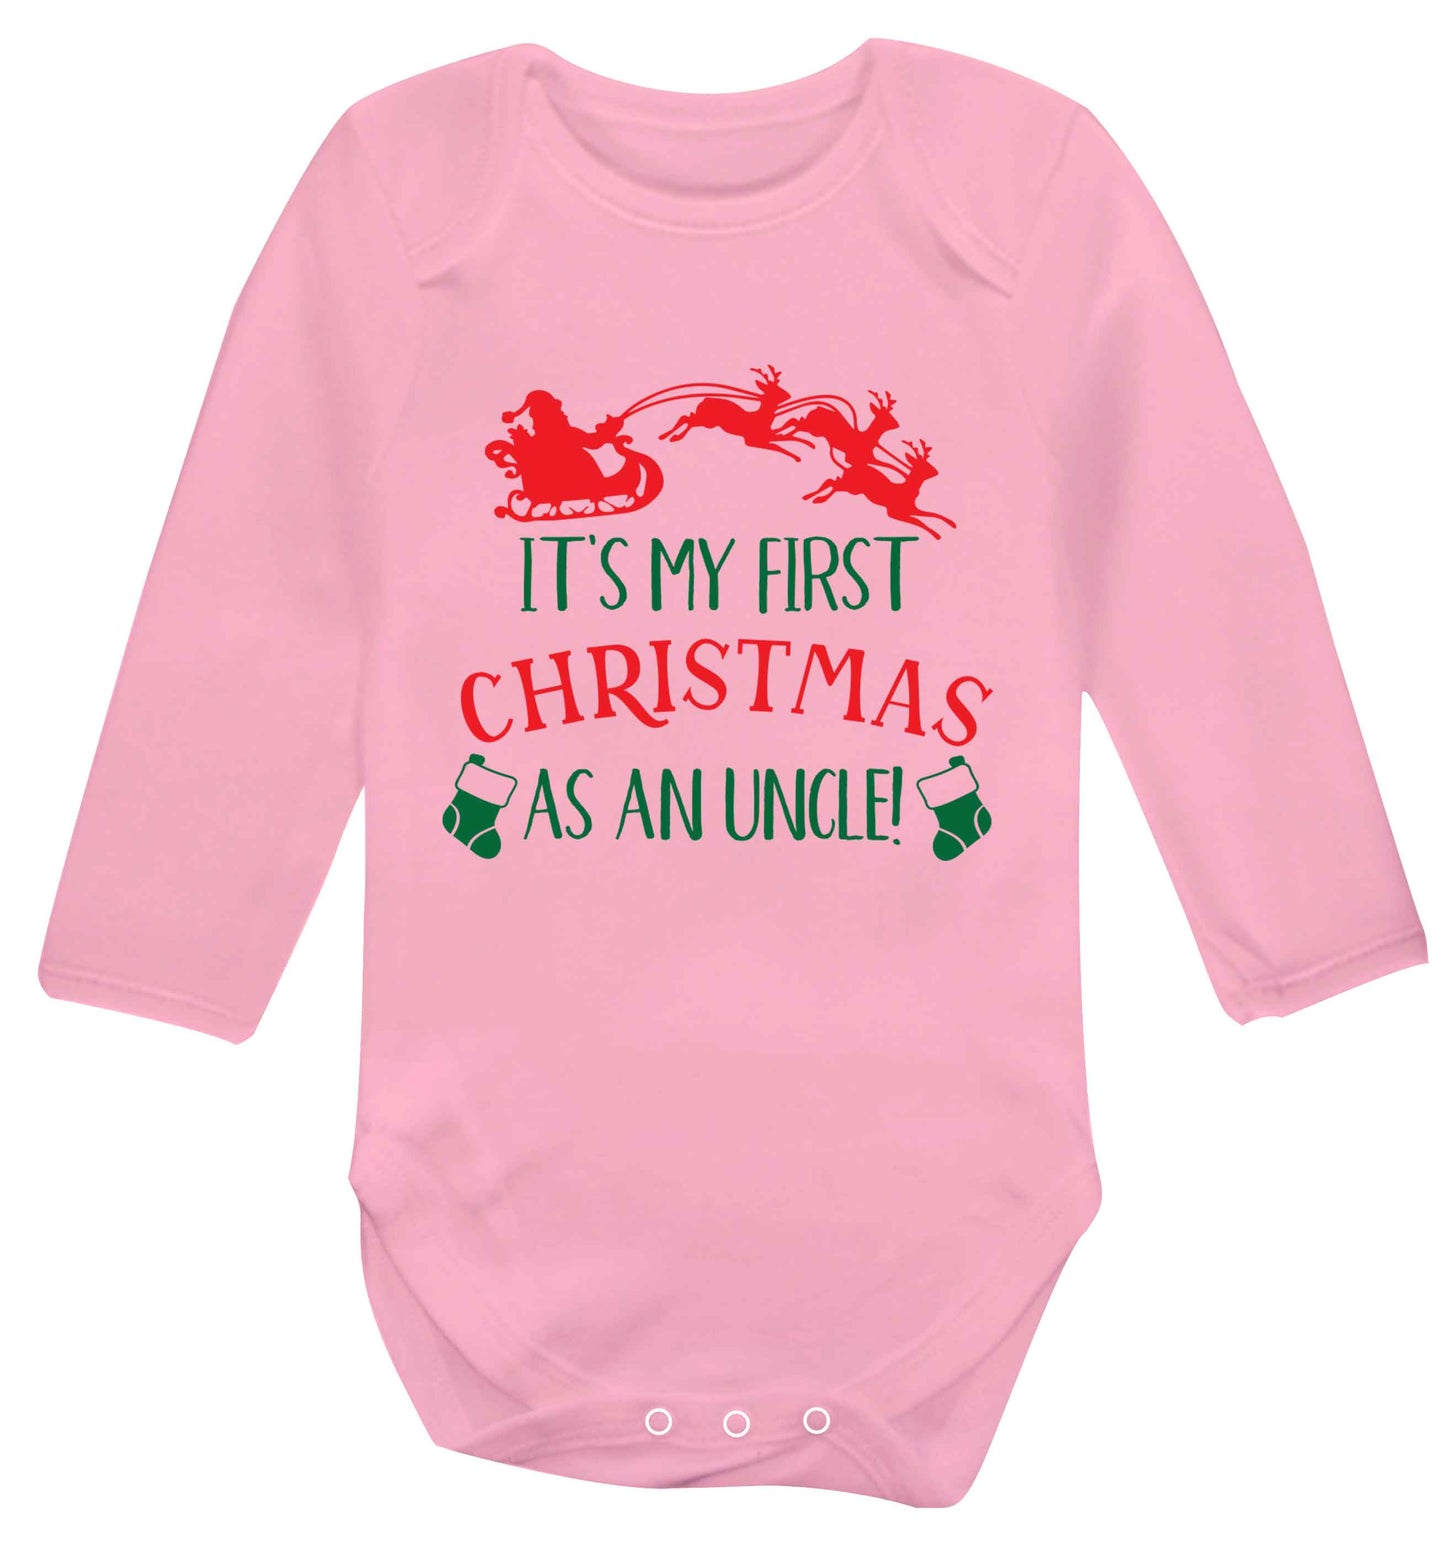 It's my first Christmas as an uncle! Baby Vest long sleeved pale pink 6-12 months